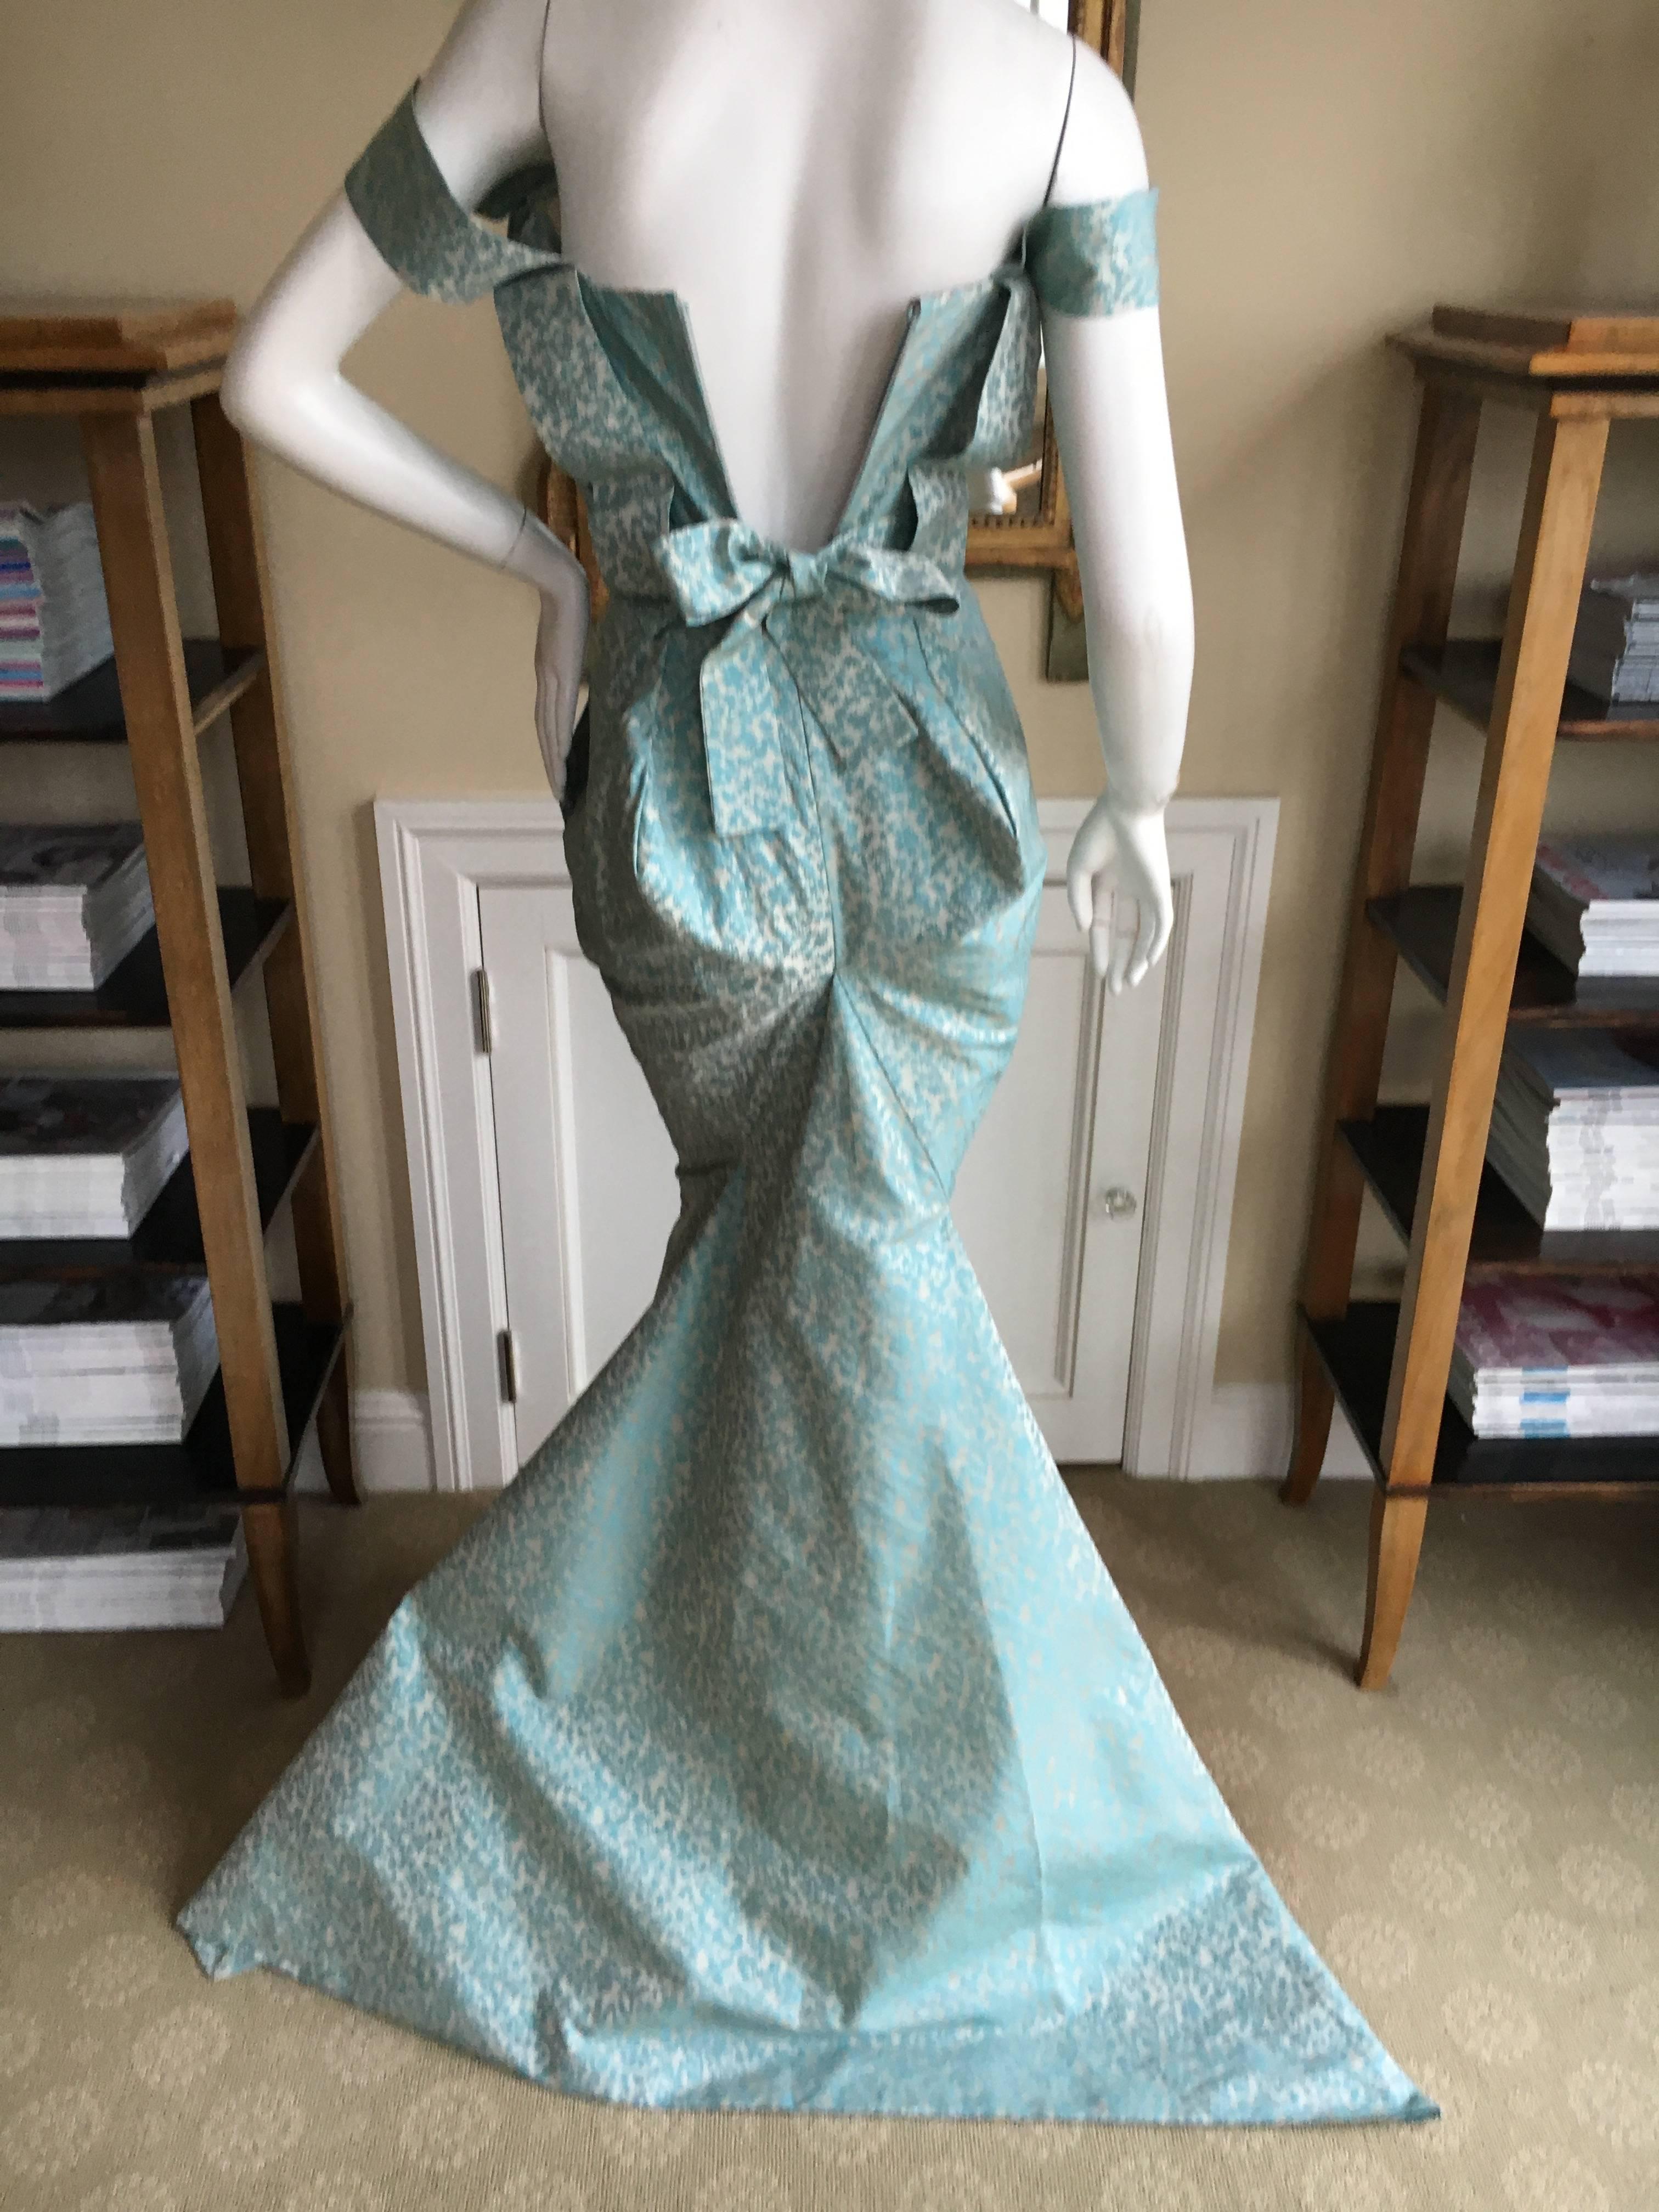 Vivienne Westwood Gold Label Fishtail Mermaid Gown.
Created for Rita Ora to wear to the 2012 British Fashion Award's, 
this was worn once to the red carpet event, in as new condition.
There is an inner Westwood corset that zips in the back, and a